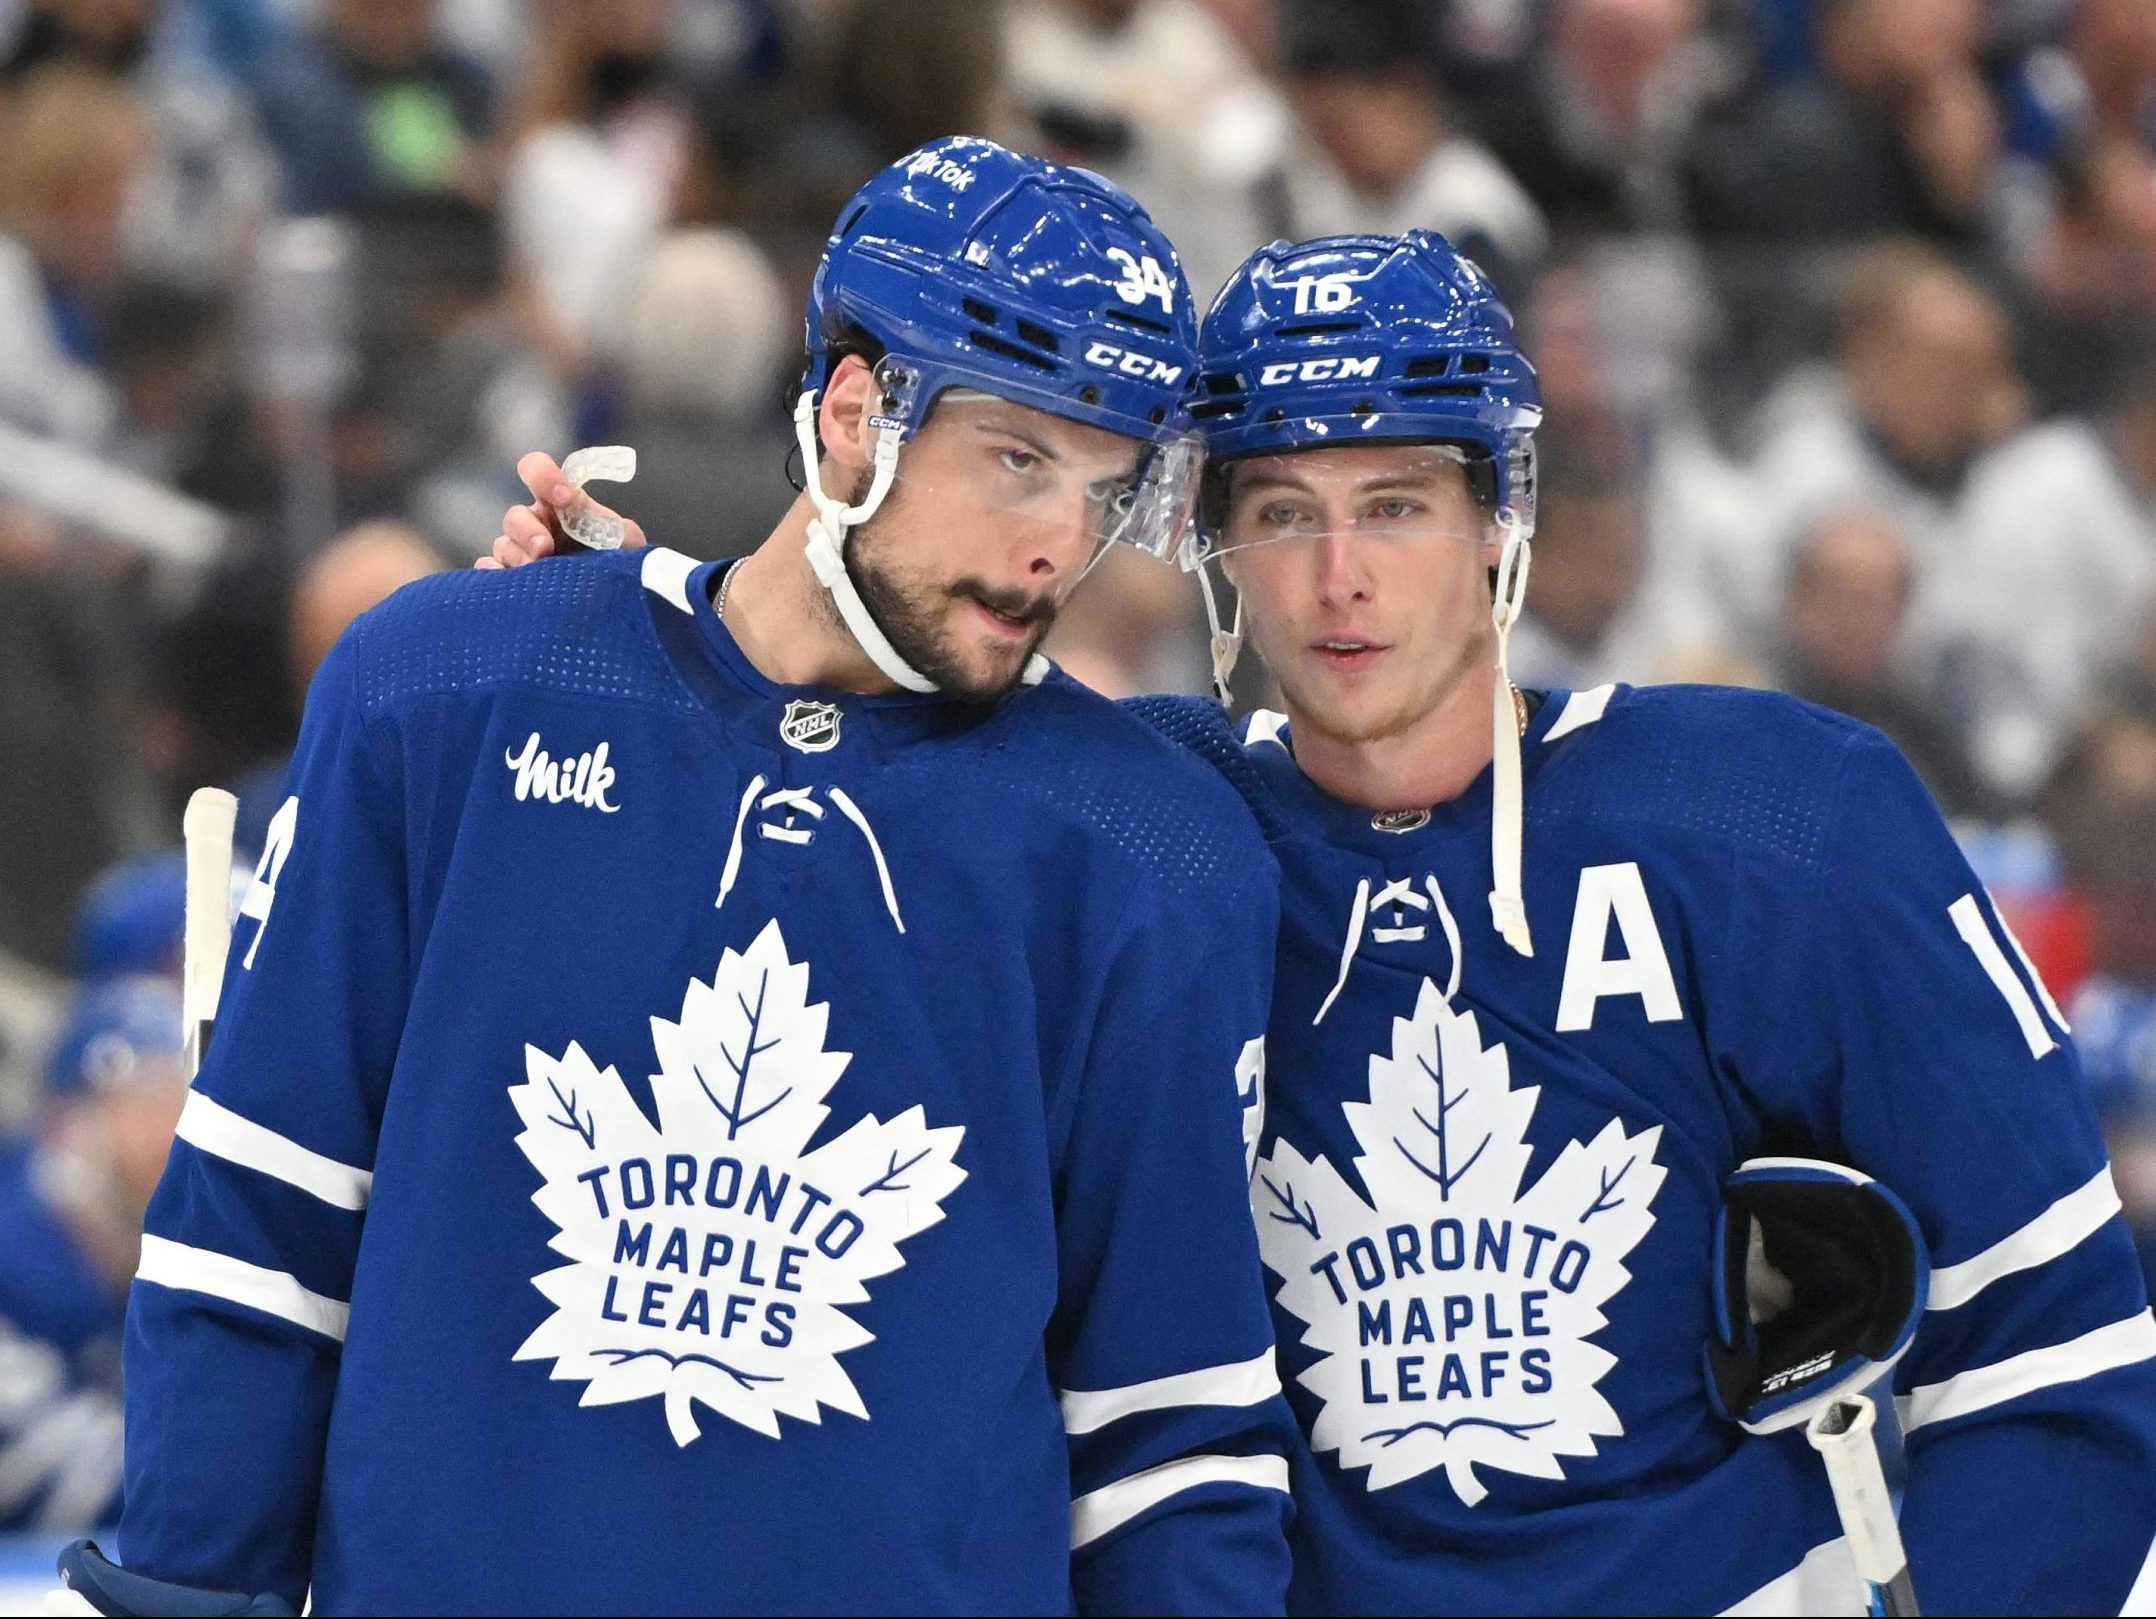 The Maple Leafs are sponsored by MILK. What if other teams had